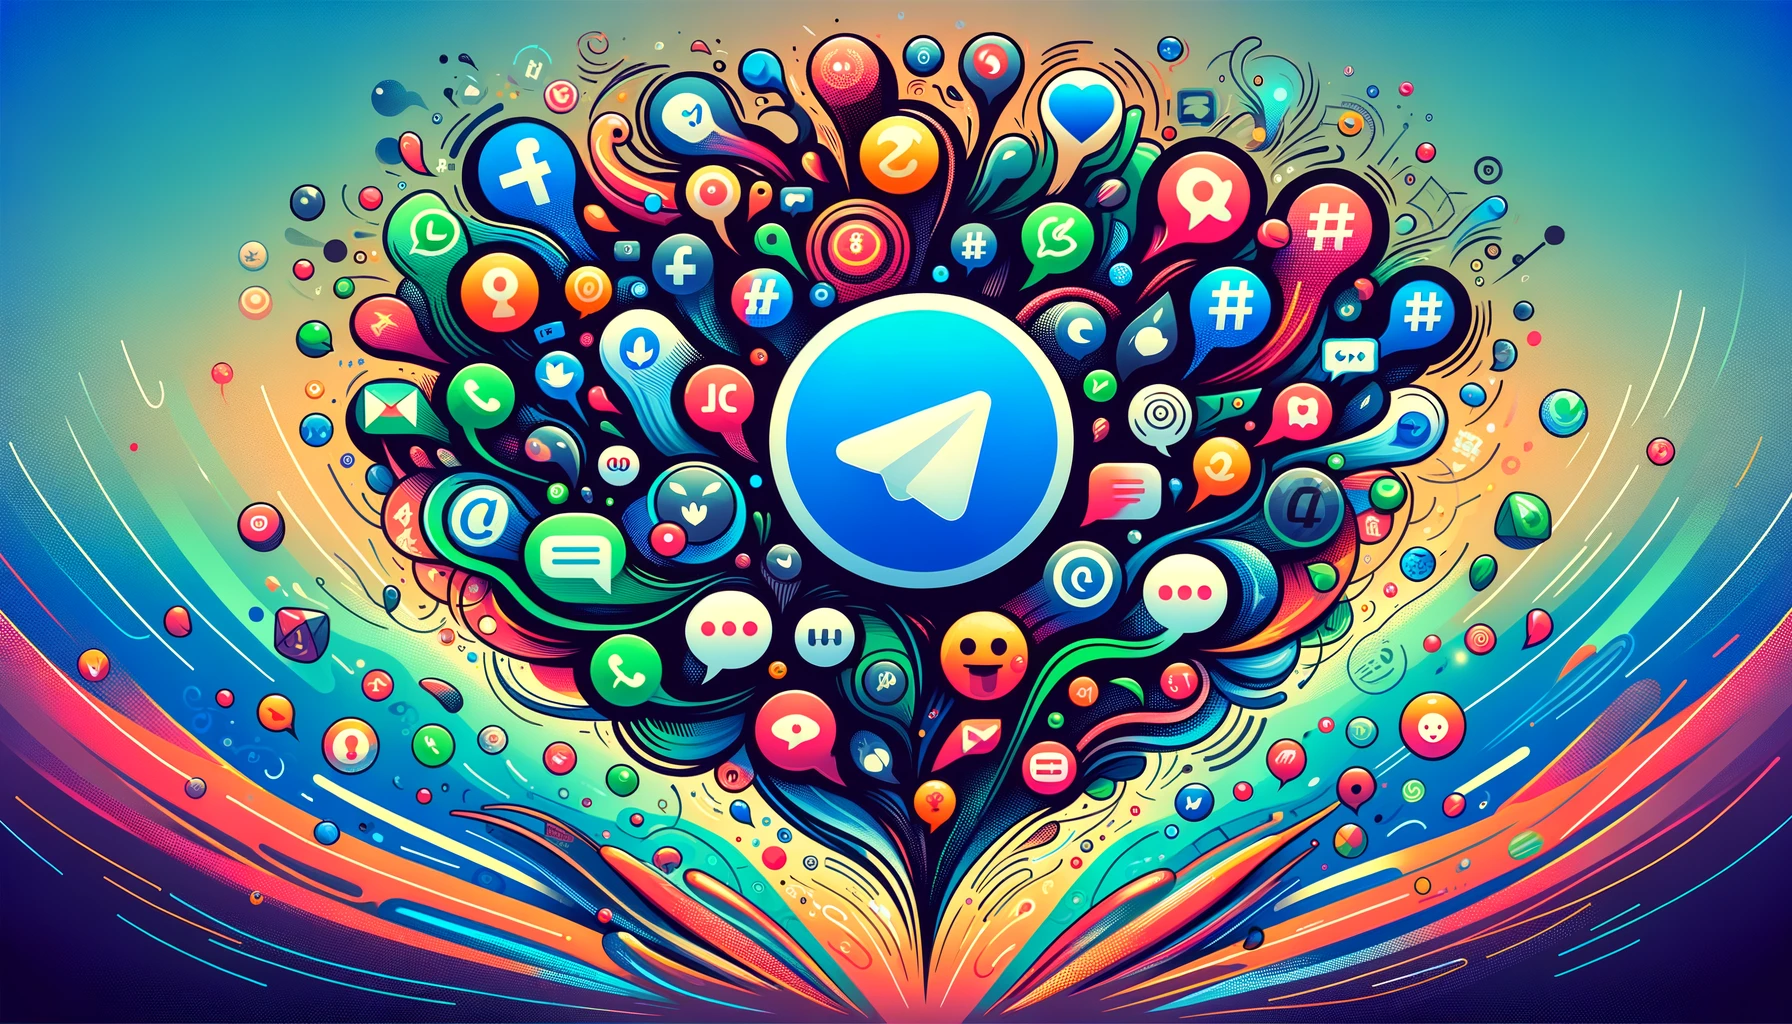 DALL·E 2024 02 16 14.03.17 Create a vibrant and colorful image representing Telegram channels. The image should be filled with a multitude of social media icons bubbles and di